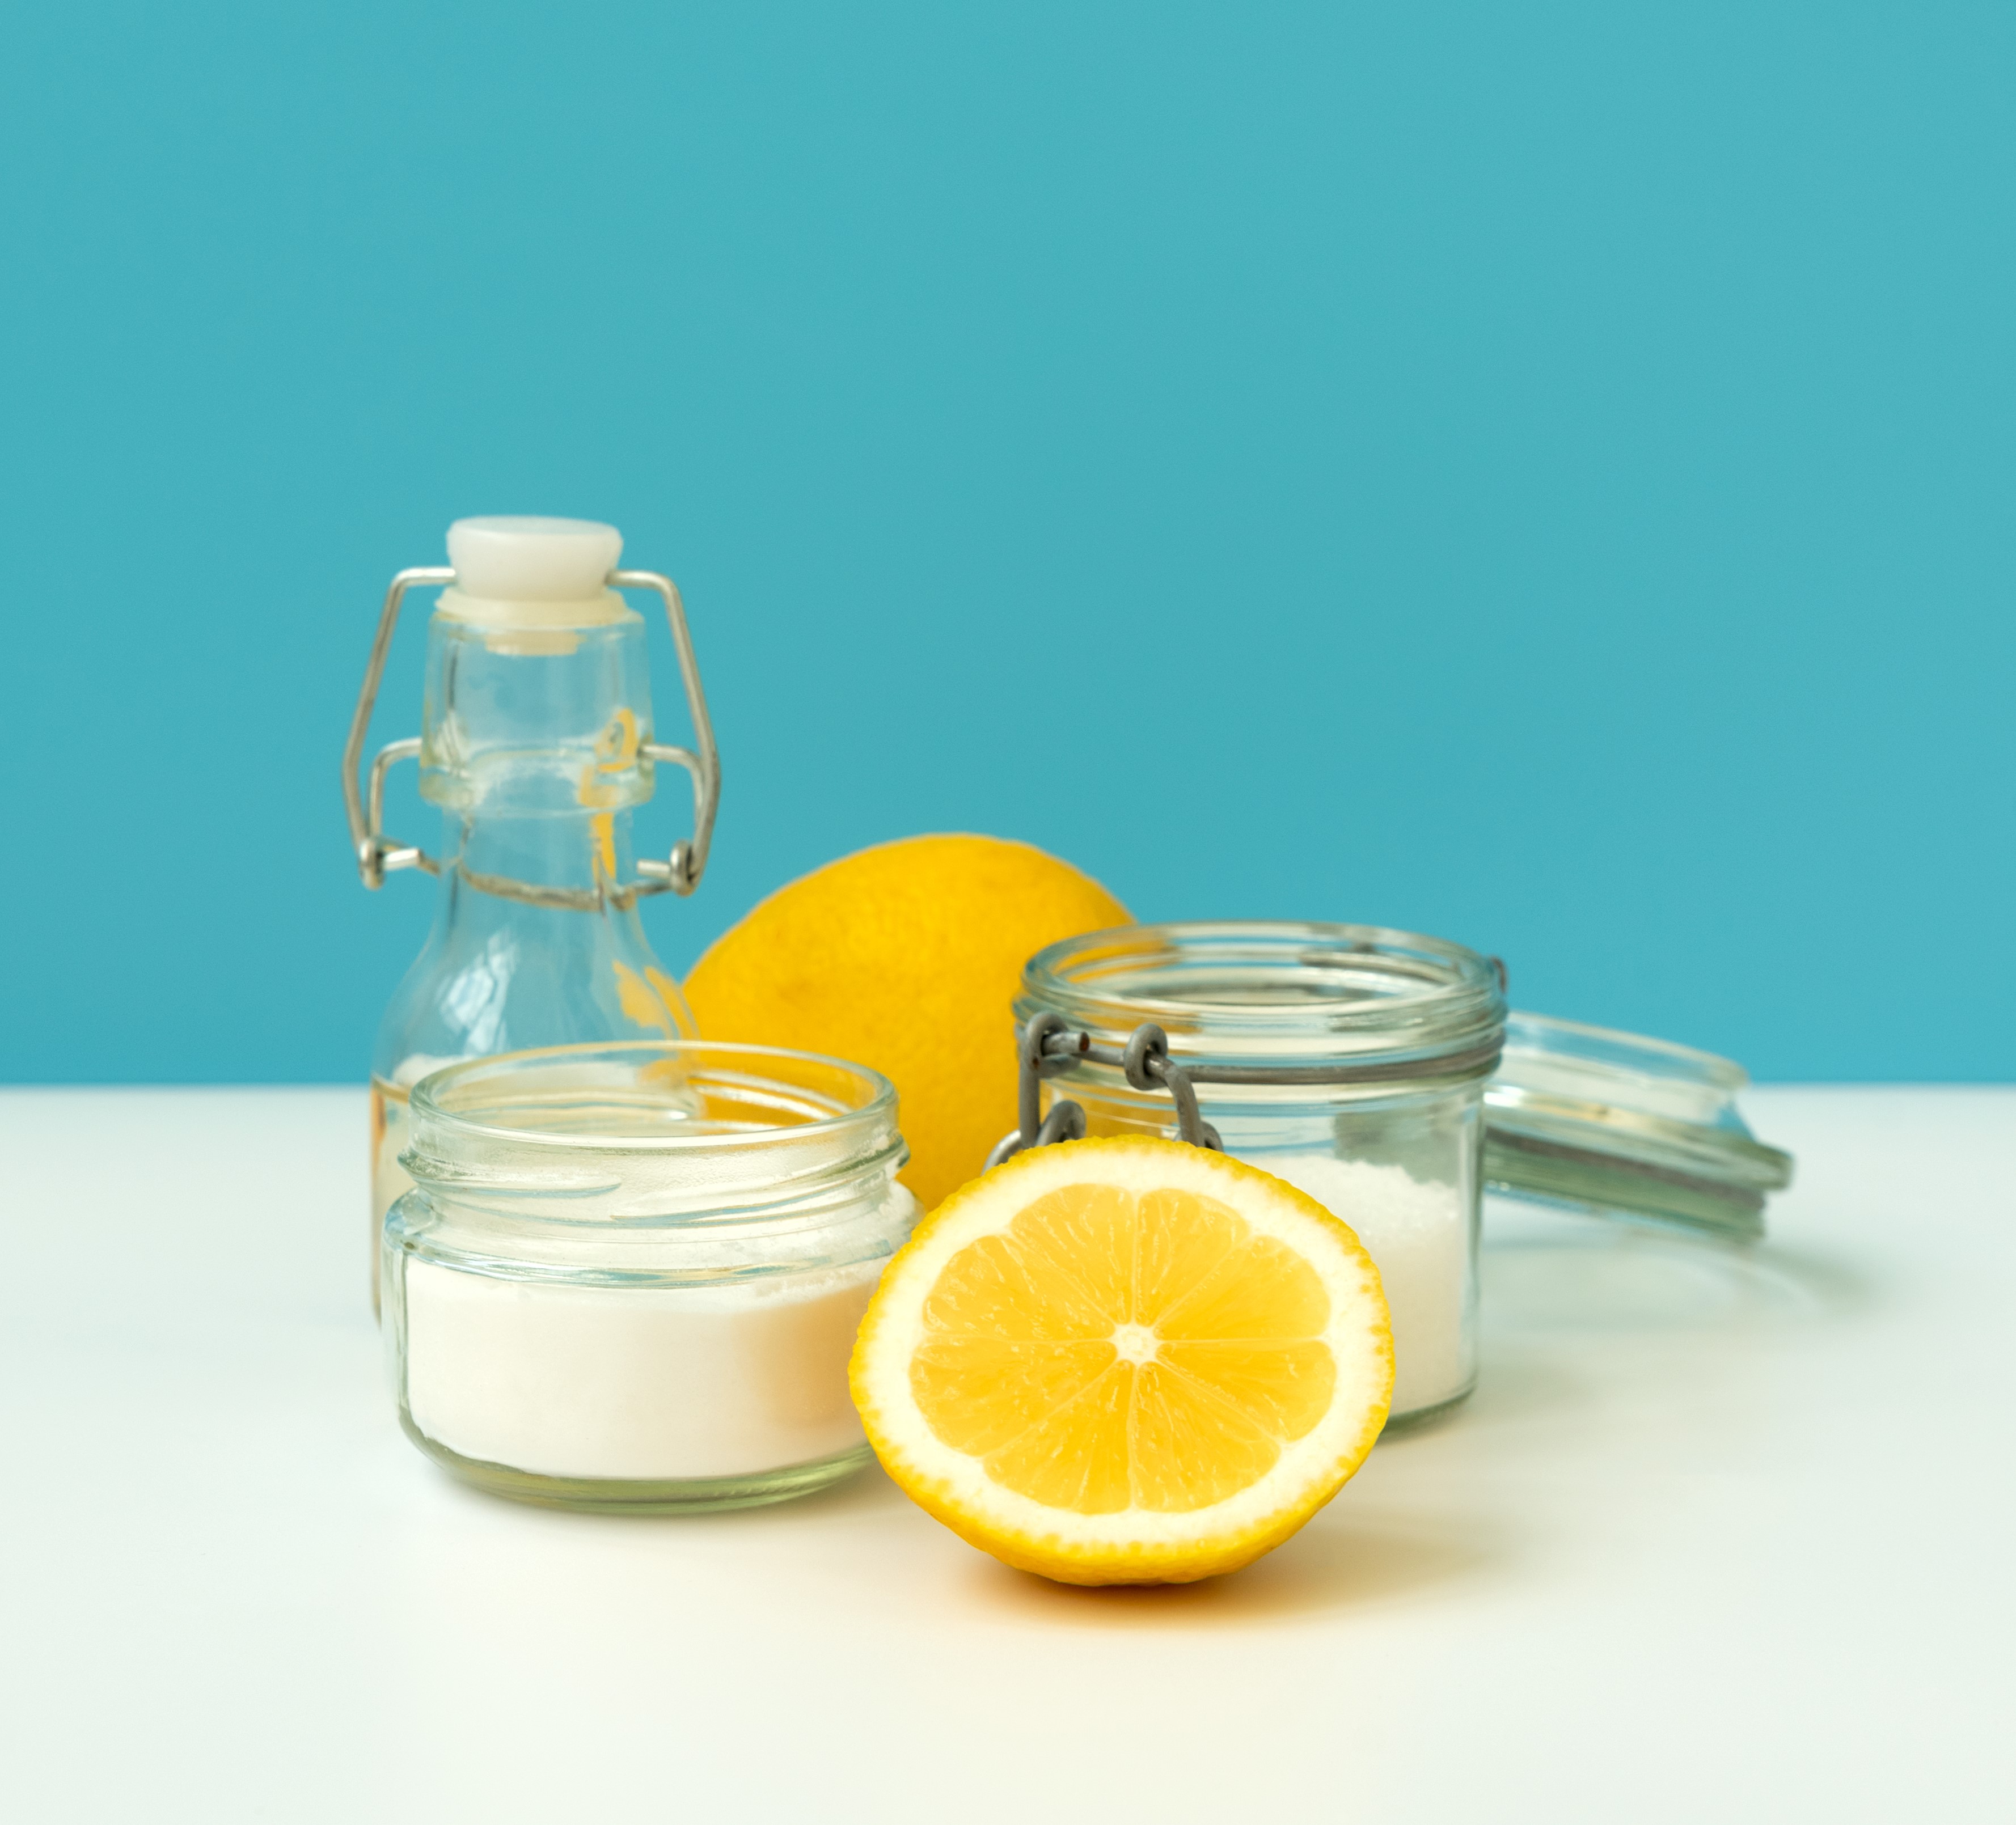 Green your clean: 9 recipes for natural cleaning products